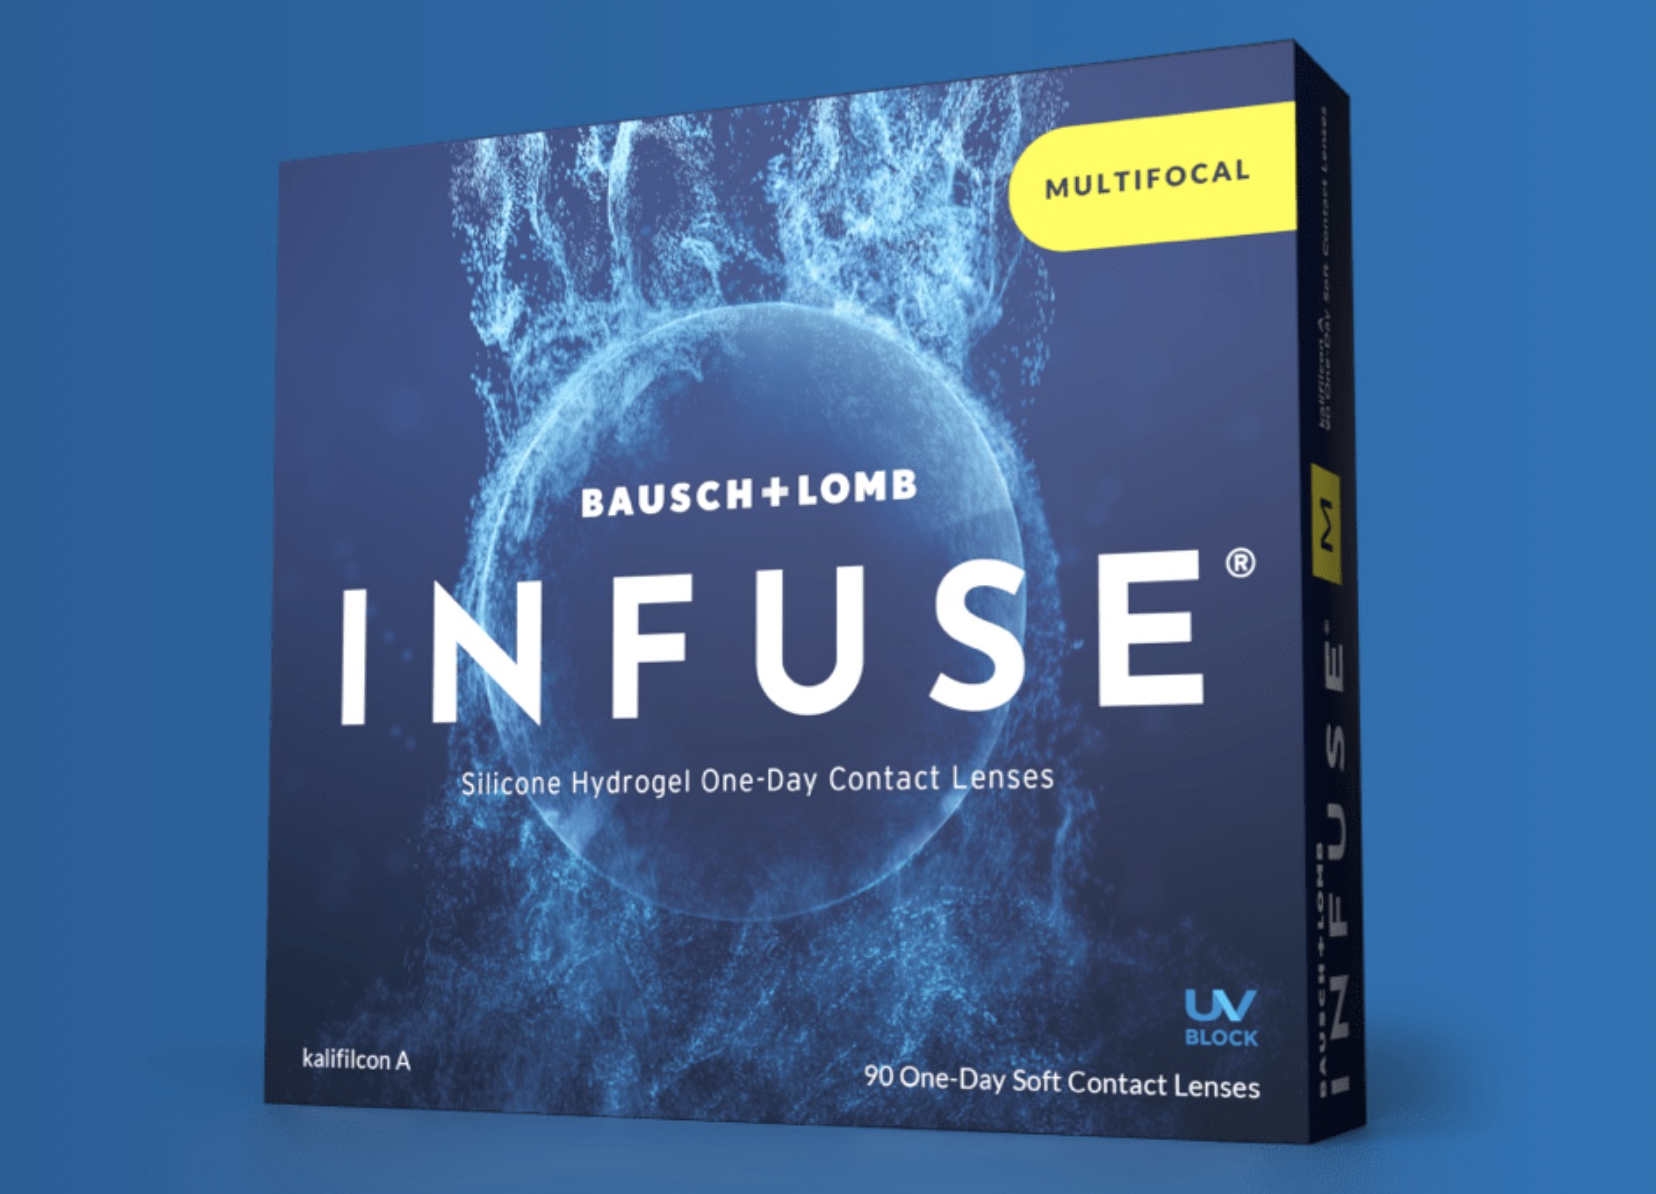 b-l-launches-infuse-multifocal-contact-lenses